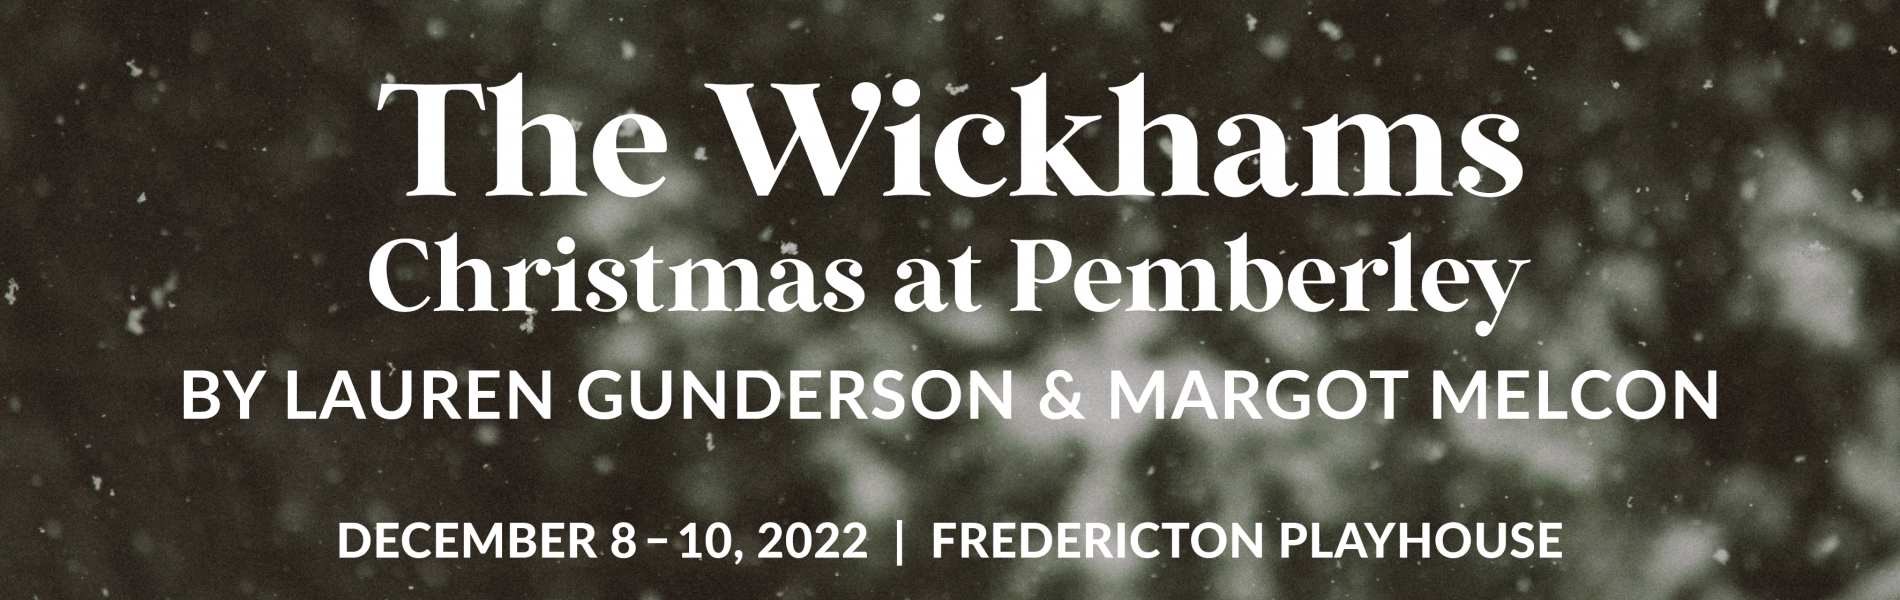 An out of focus black and white background with The words The Wickhams, Christmas at Pemberley on it.